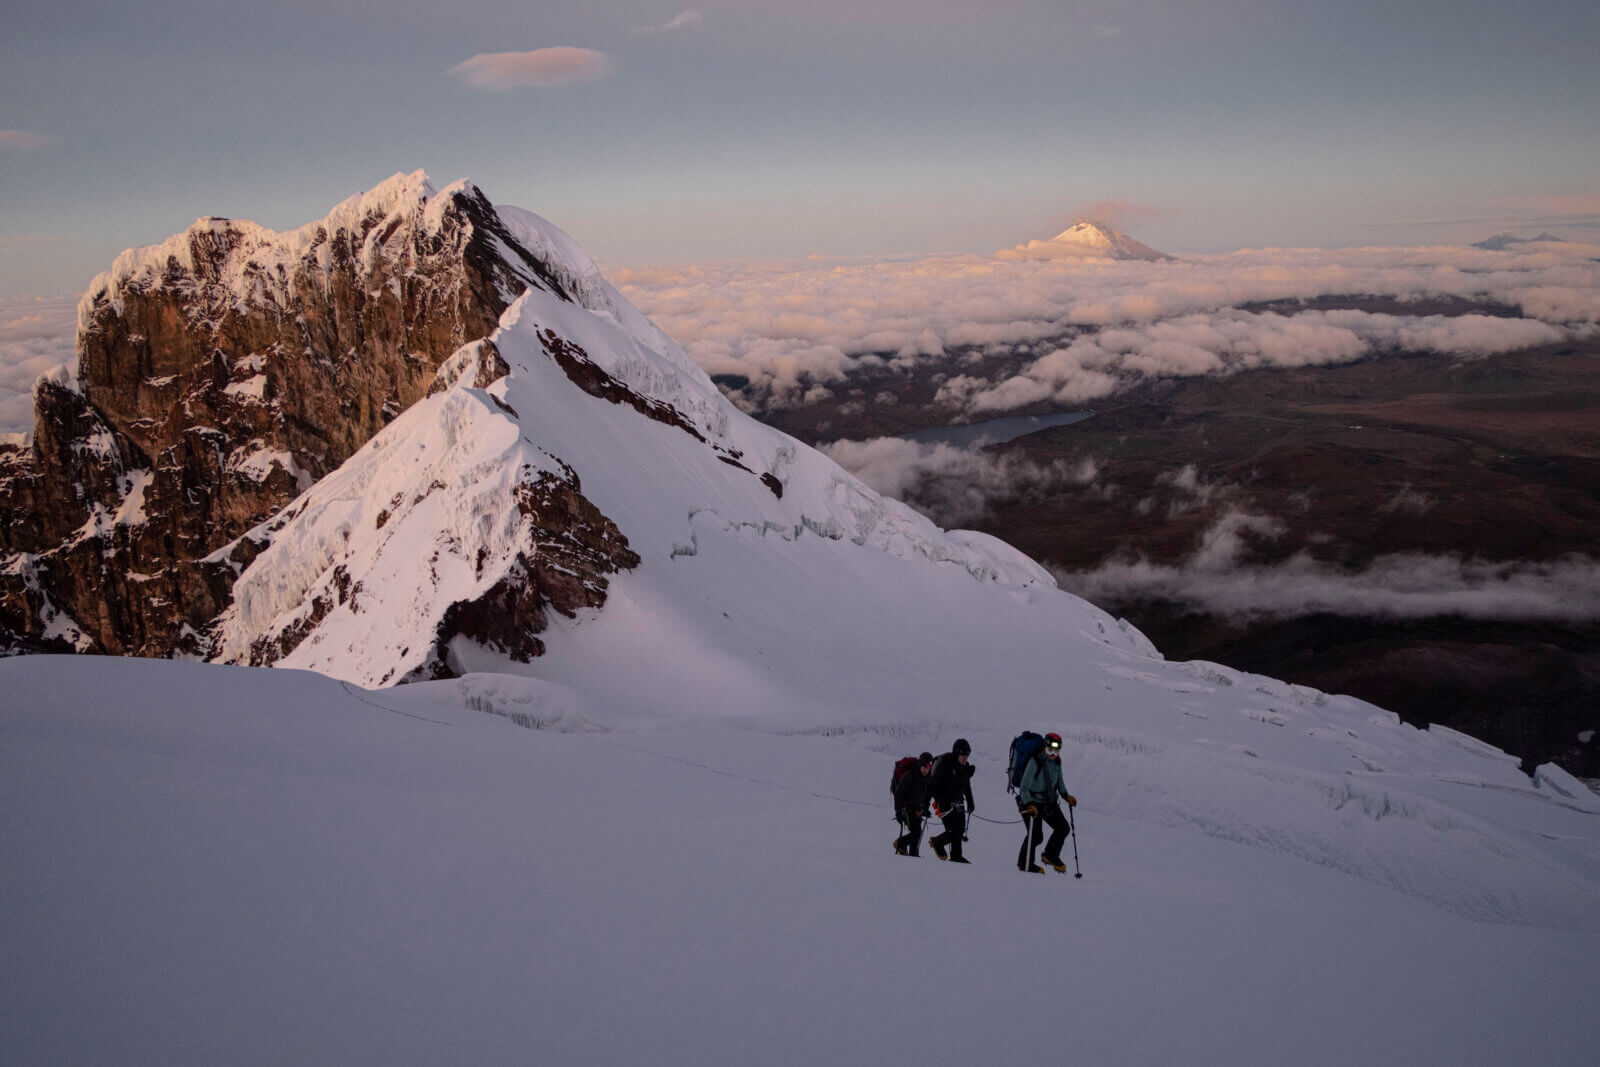 Climbers learning high-altitude mountaineering skills on a volcano in Ecuador at sunrise as part of Alpenglow Expedition's Ecuador Climbing School.